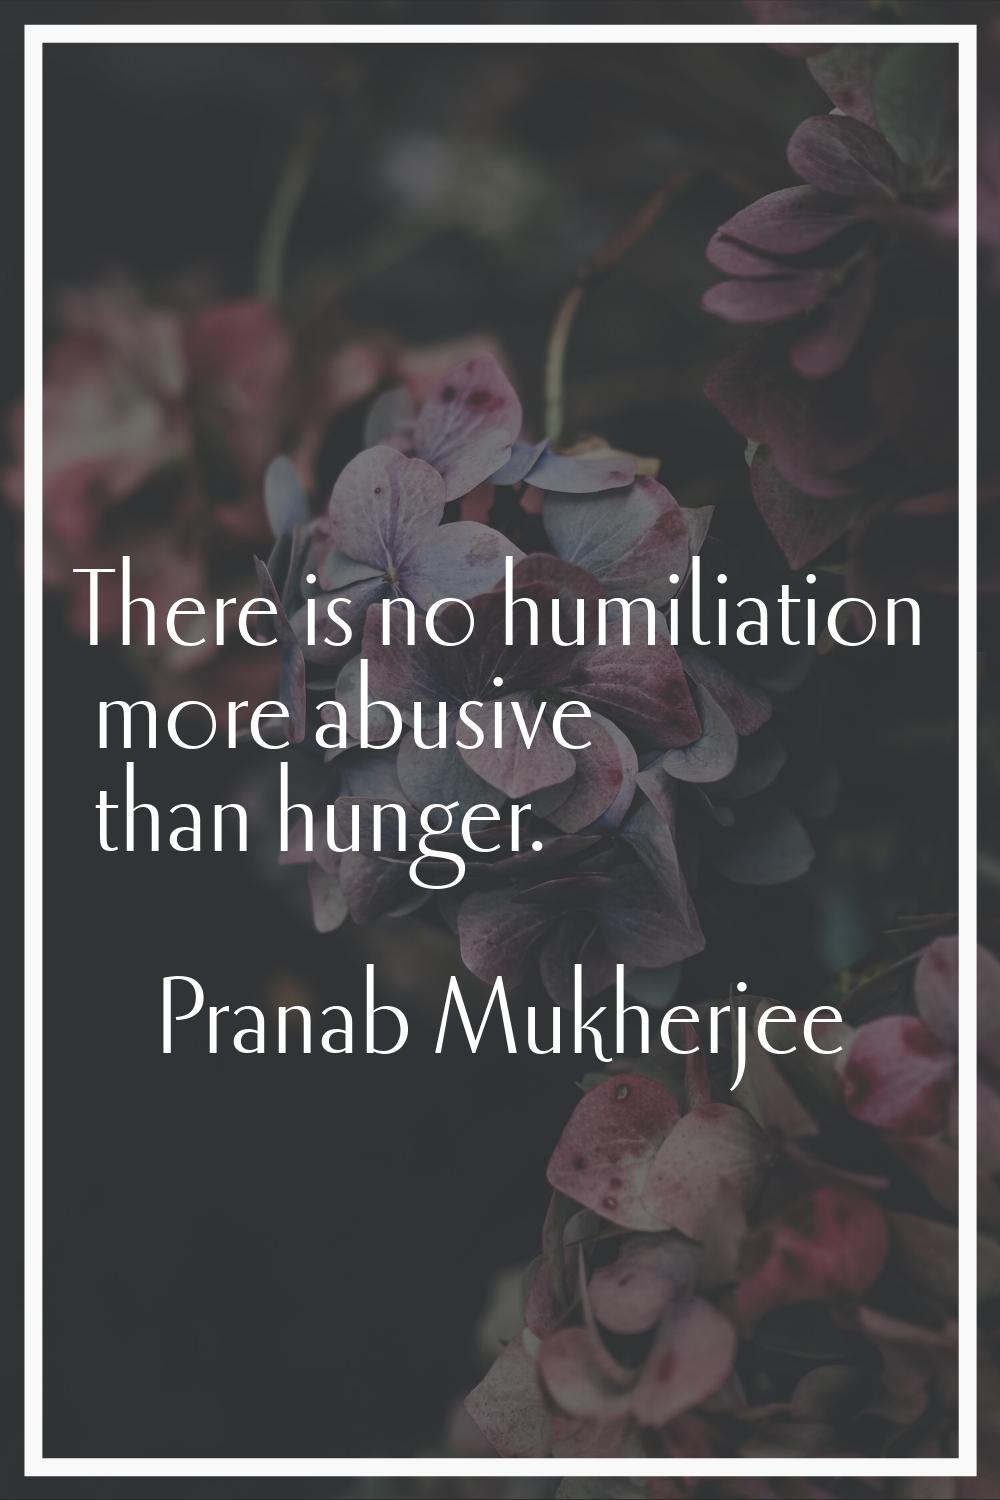 There is no humiliation more abusive than hunger.